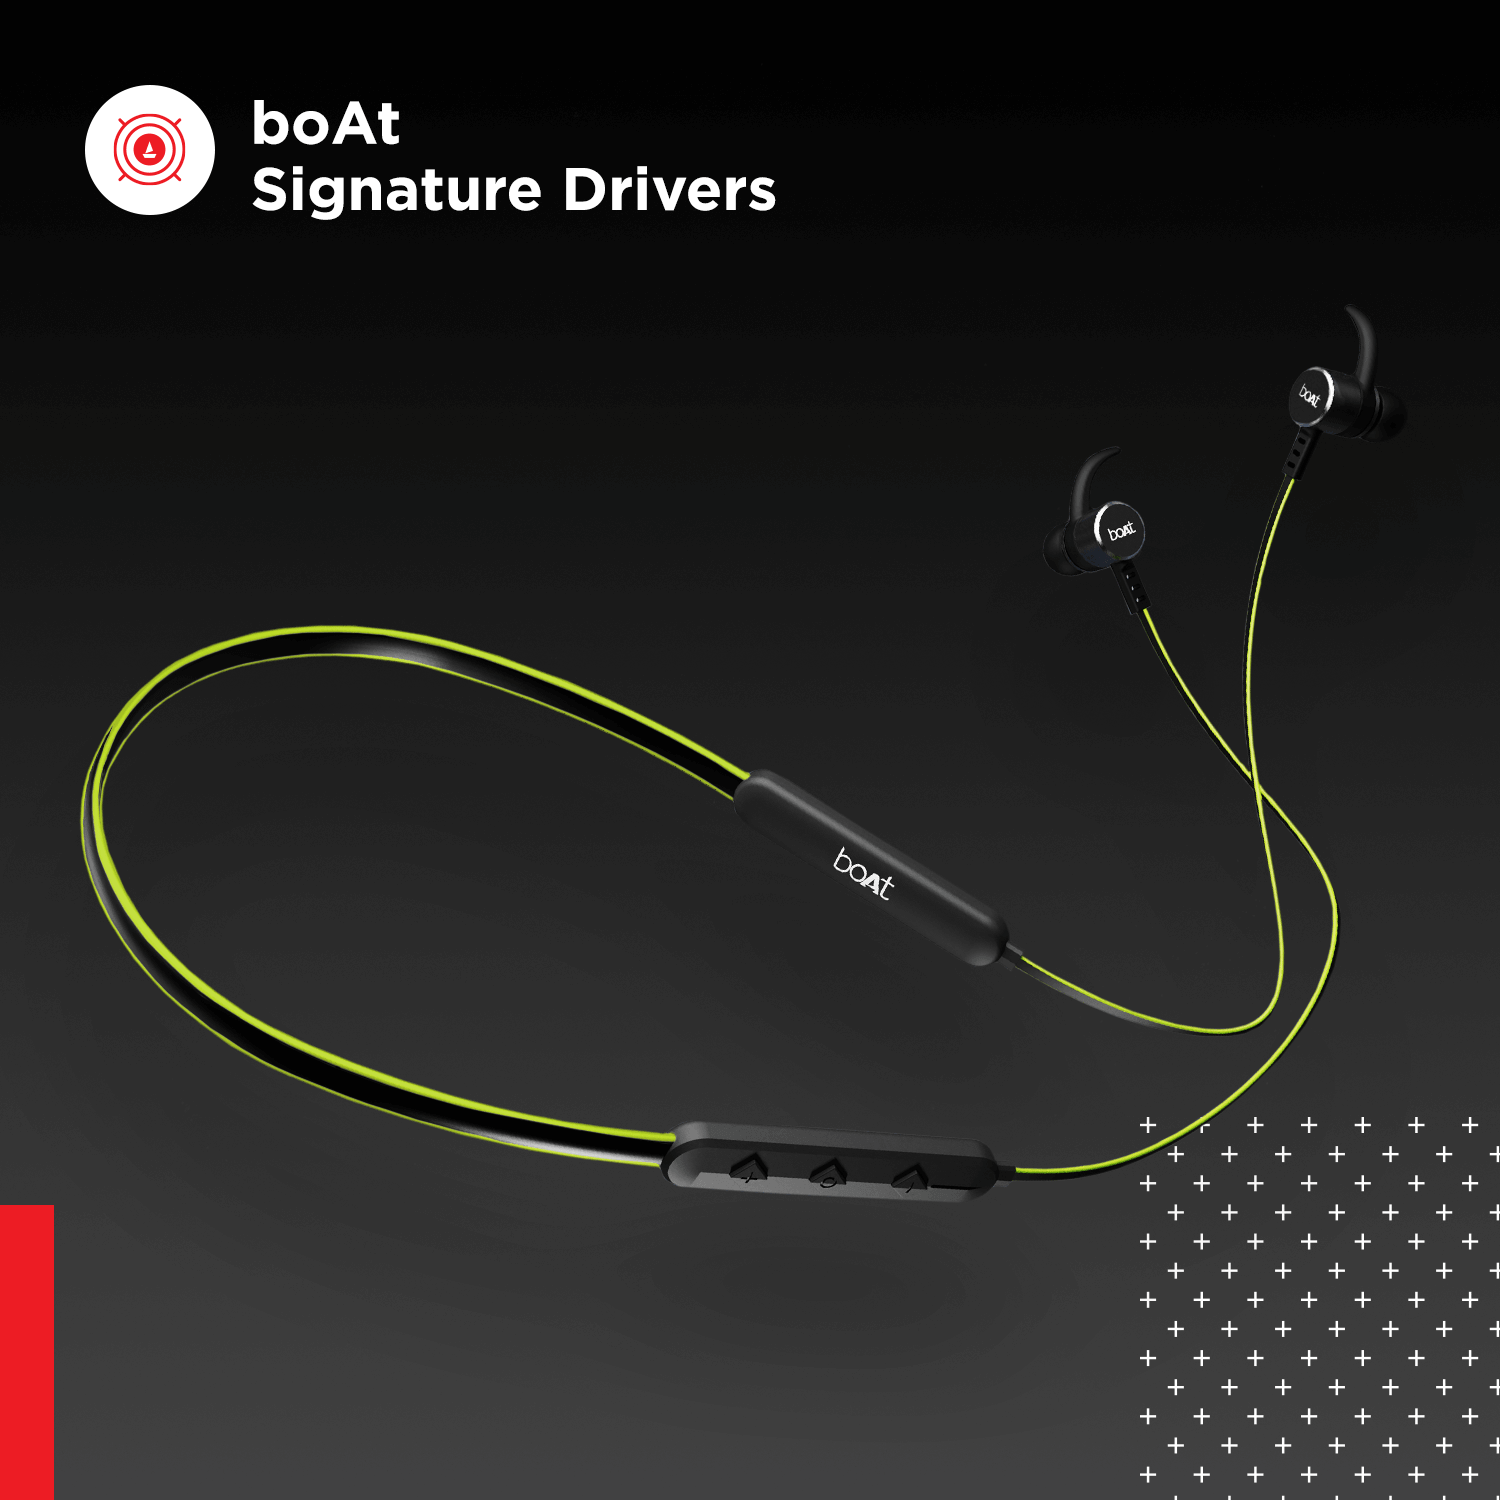 boAt Rockerz 255 | Bluetooth Wireless Earphone with 10 mm Dynamic Drivers, Uninterrupted Music Upto 6 Hours, IPX5 Sweat & Water Resistance, cVc Noise Cancellation